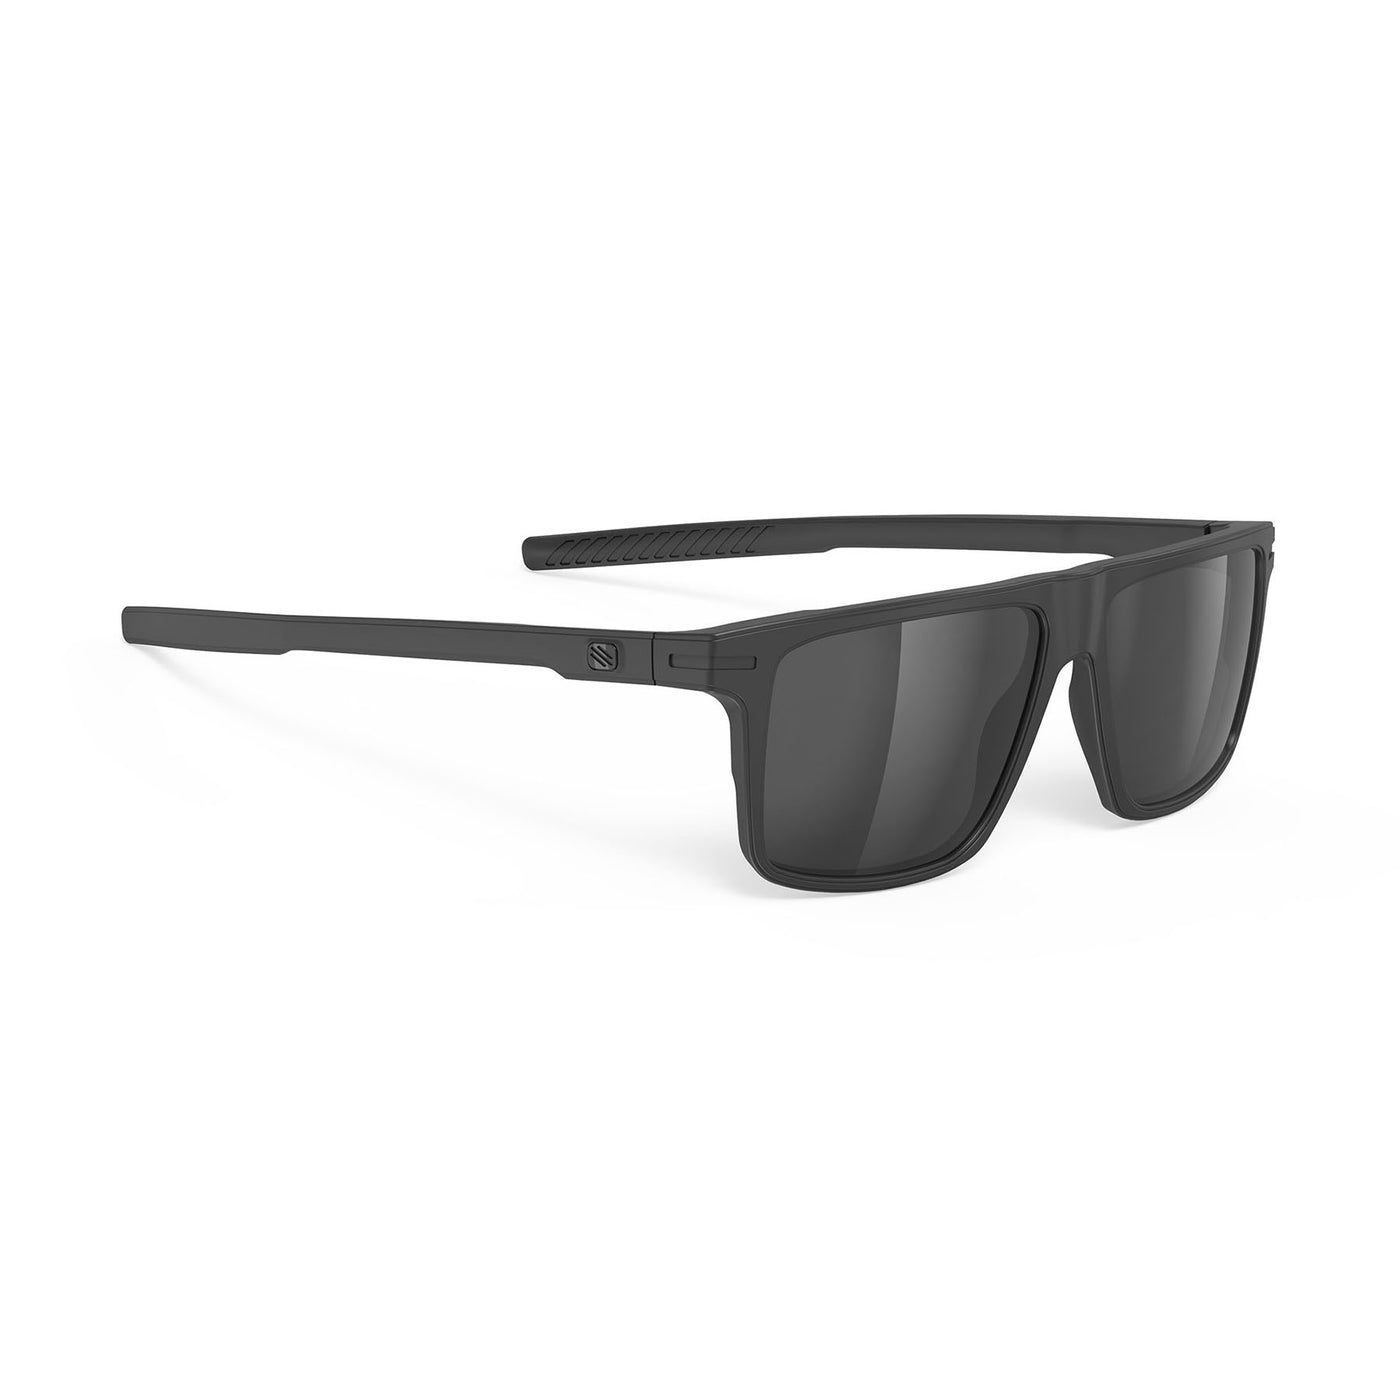 Rudy Project Stellar lifestyle, beach, boating and fishing prescription sunglasses#color_stellar-matte-black-frame-with-polar-3fx-grey-laser-lenses